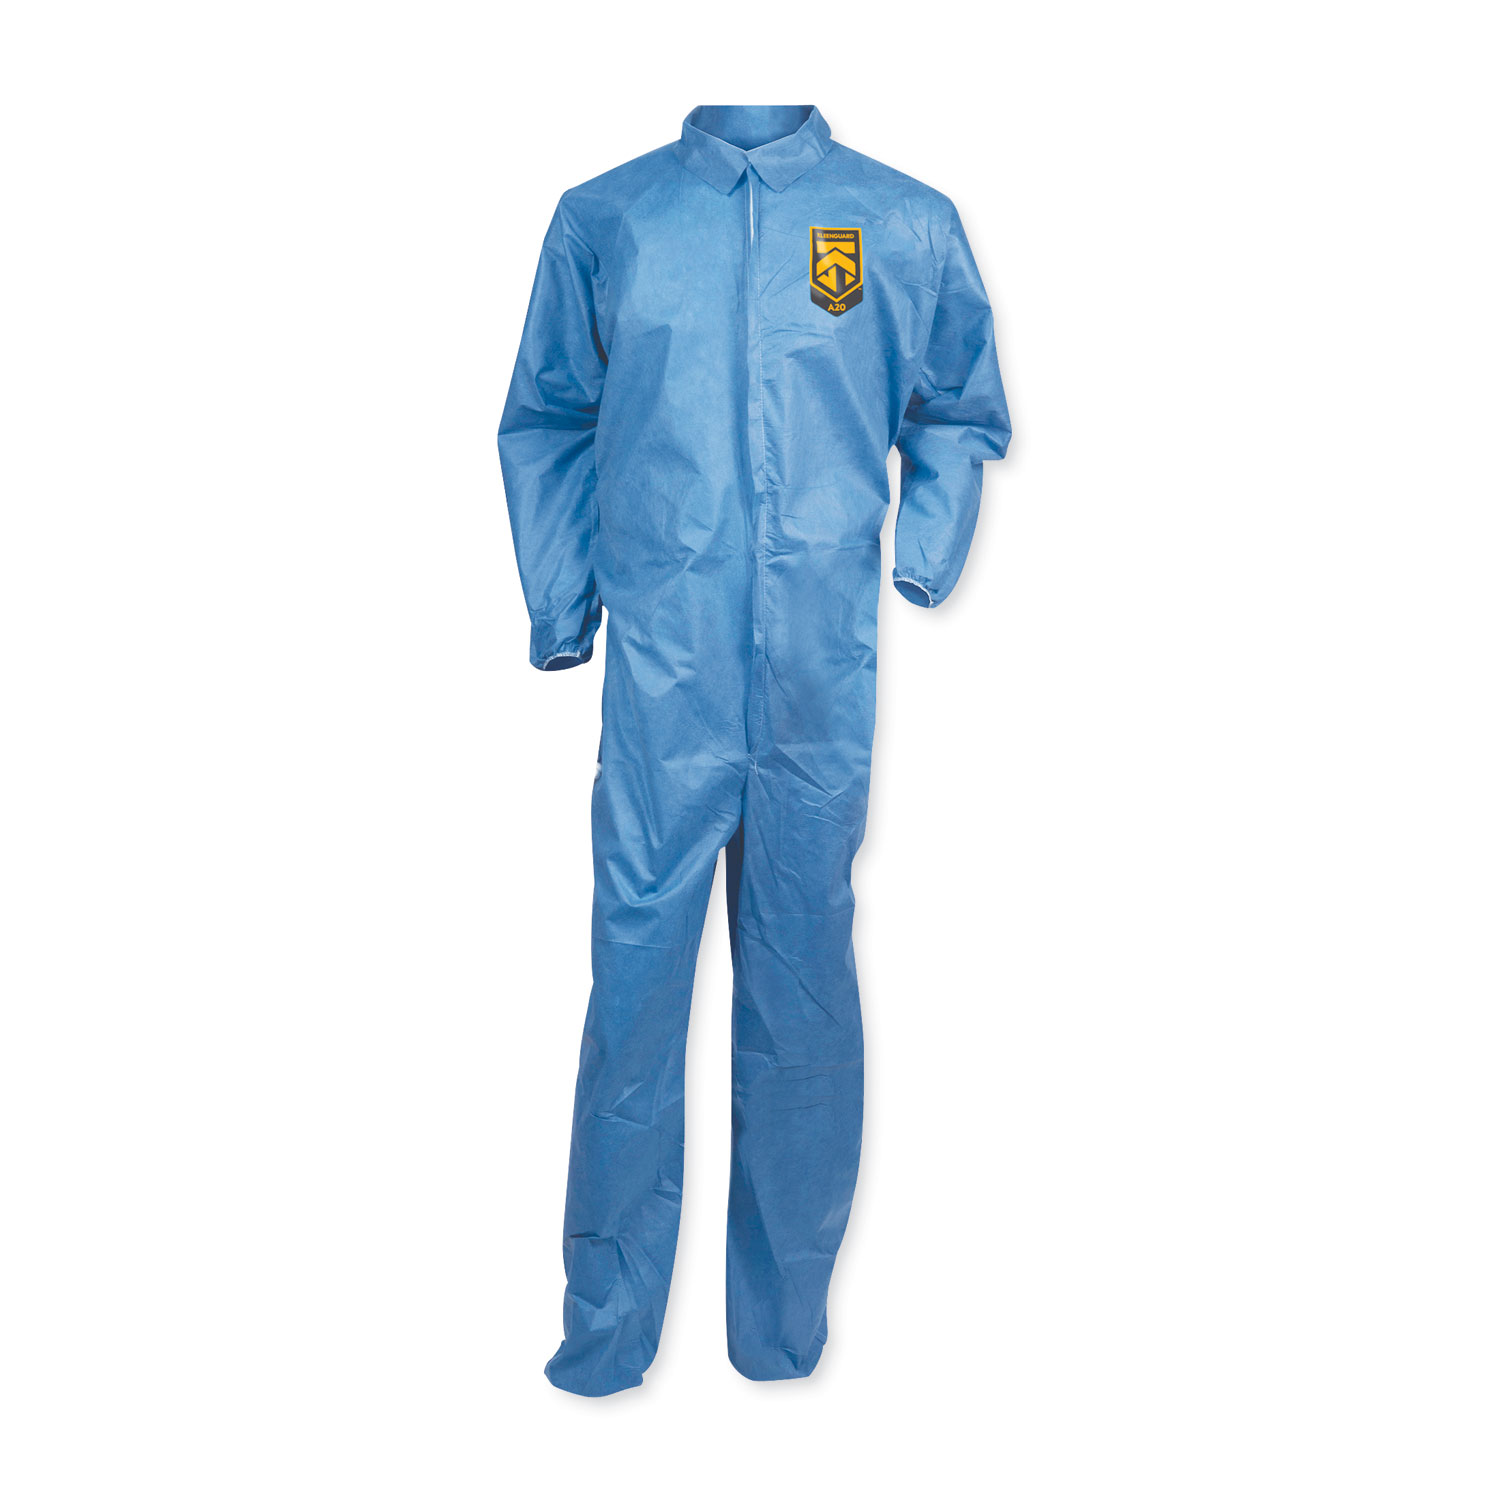  KleenGuard KCC 58505 A20 Coveralls, MICROFORCE Barrier SMS Fabric, Blue, 2X-Large, 24/Carton (KCC58505) 